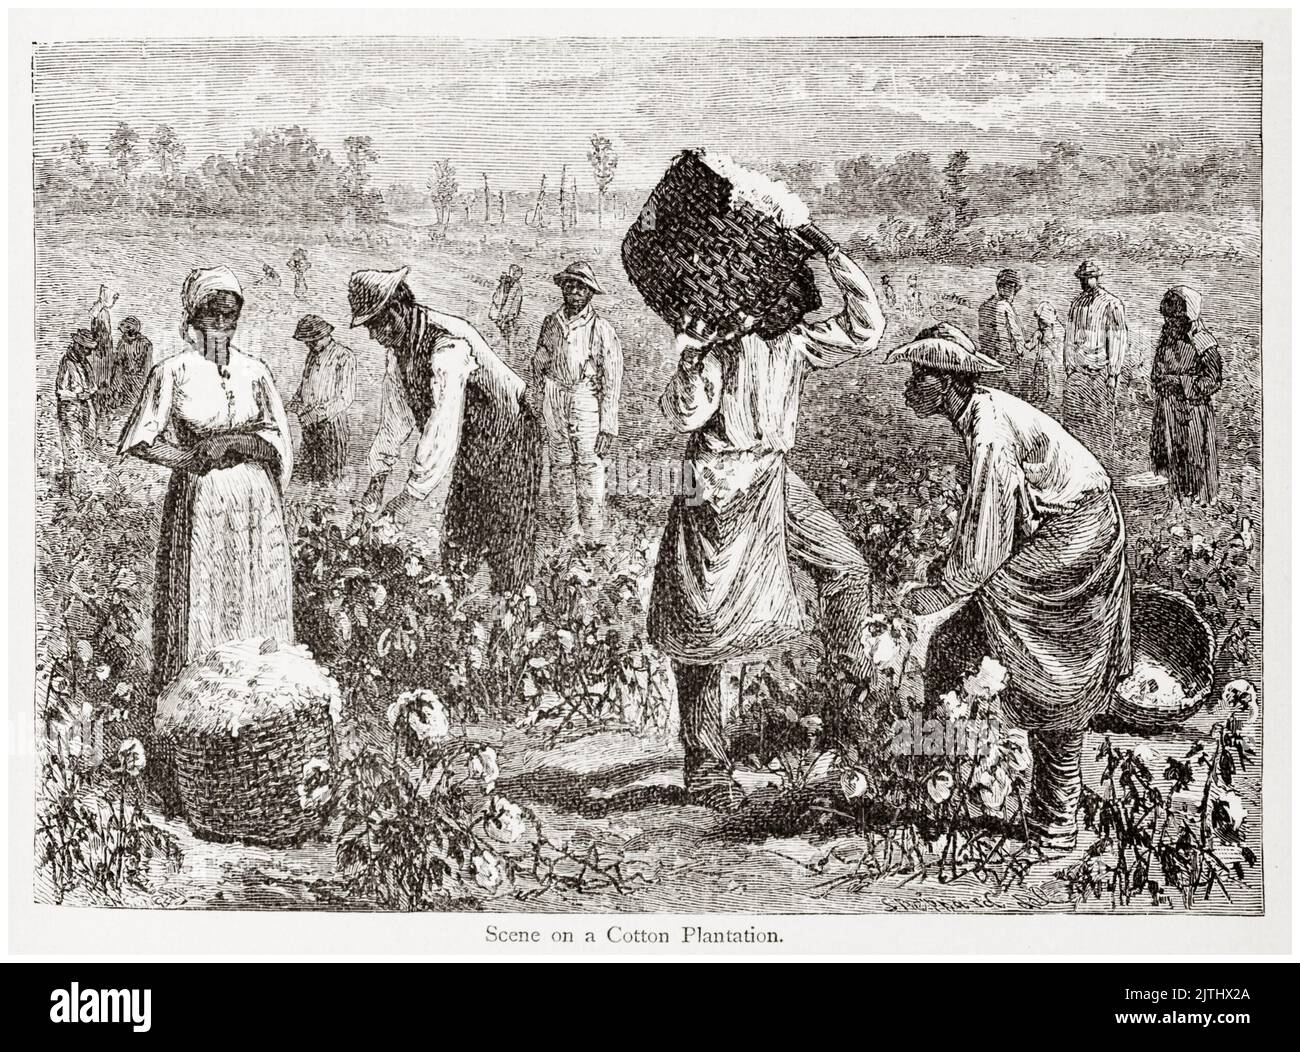 Slaves on a Cotton Plantation in the Southern States of America, Illustration, 1848 Stockfoto